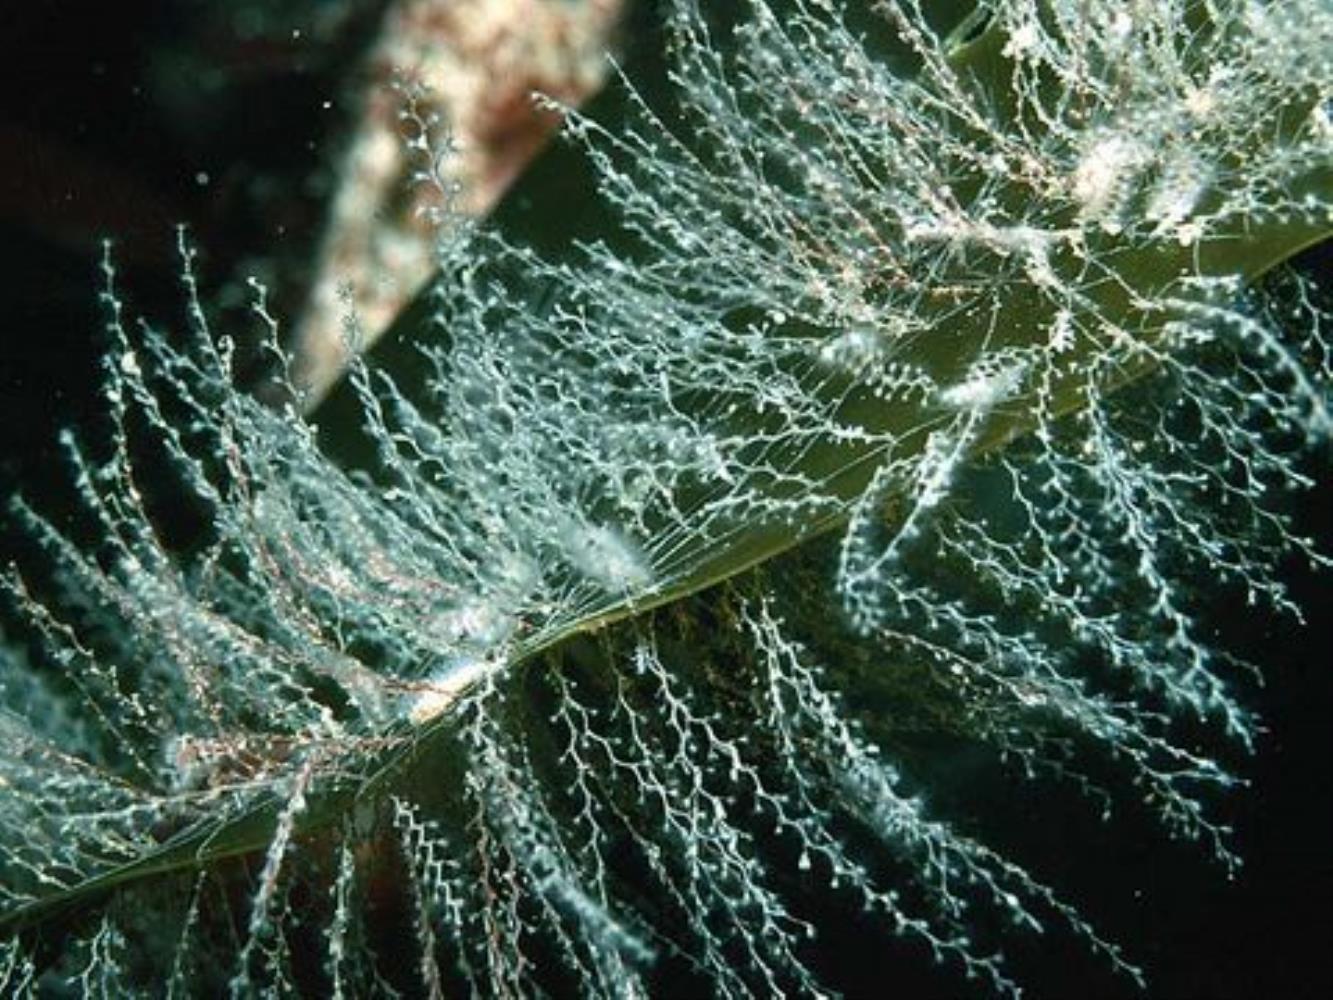 Knotted Thread Hydroid